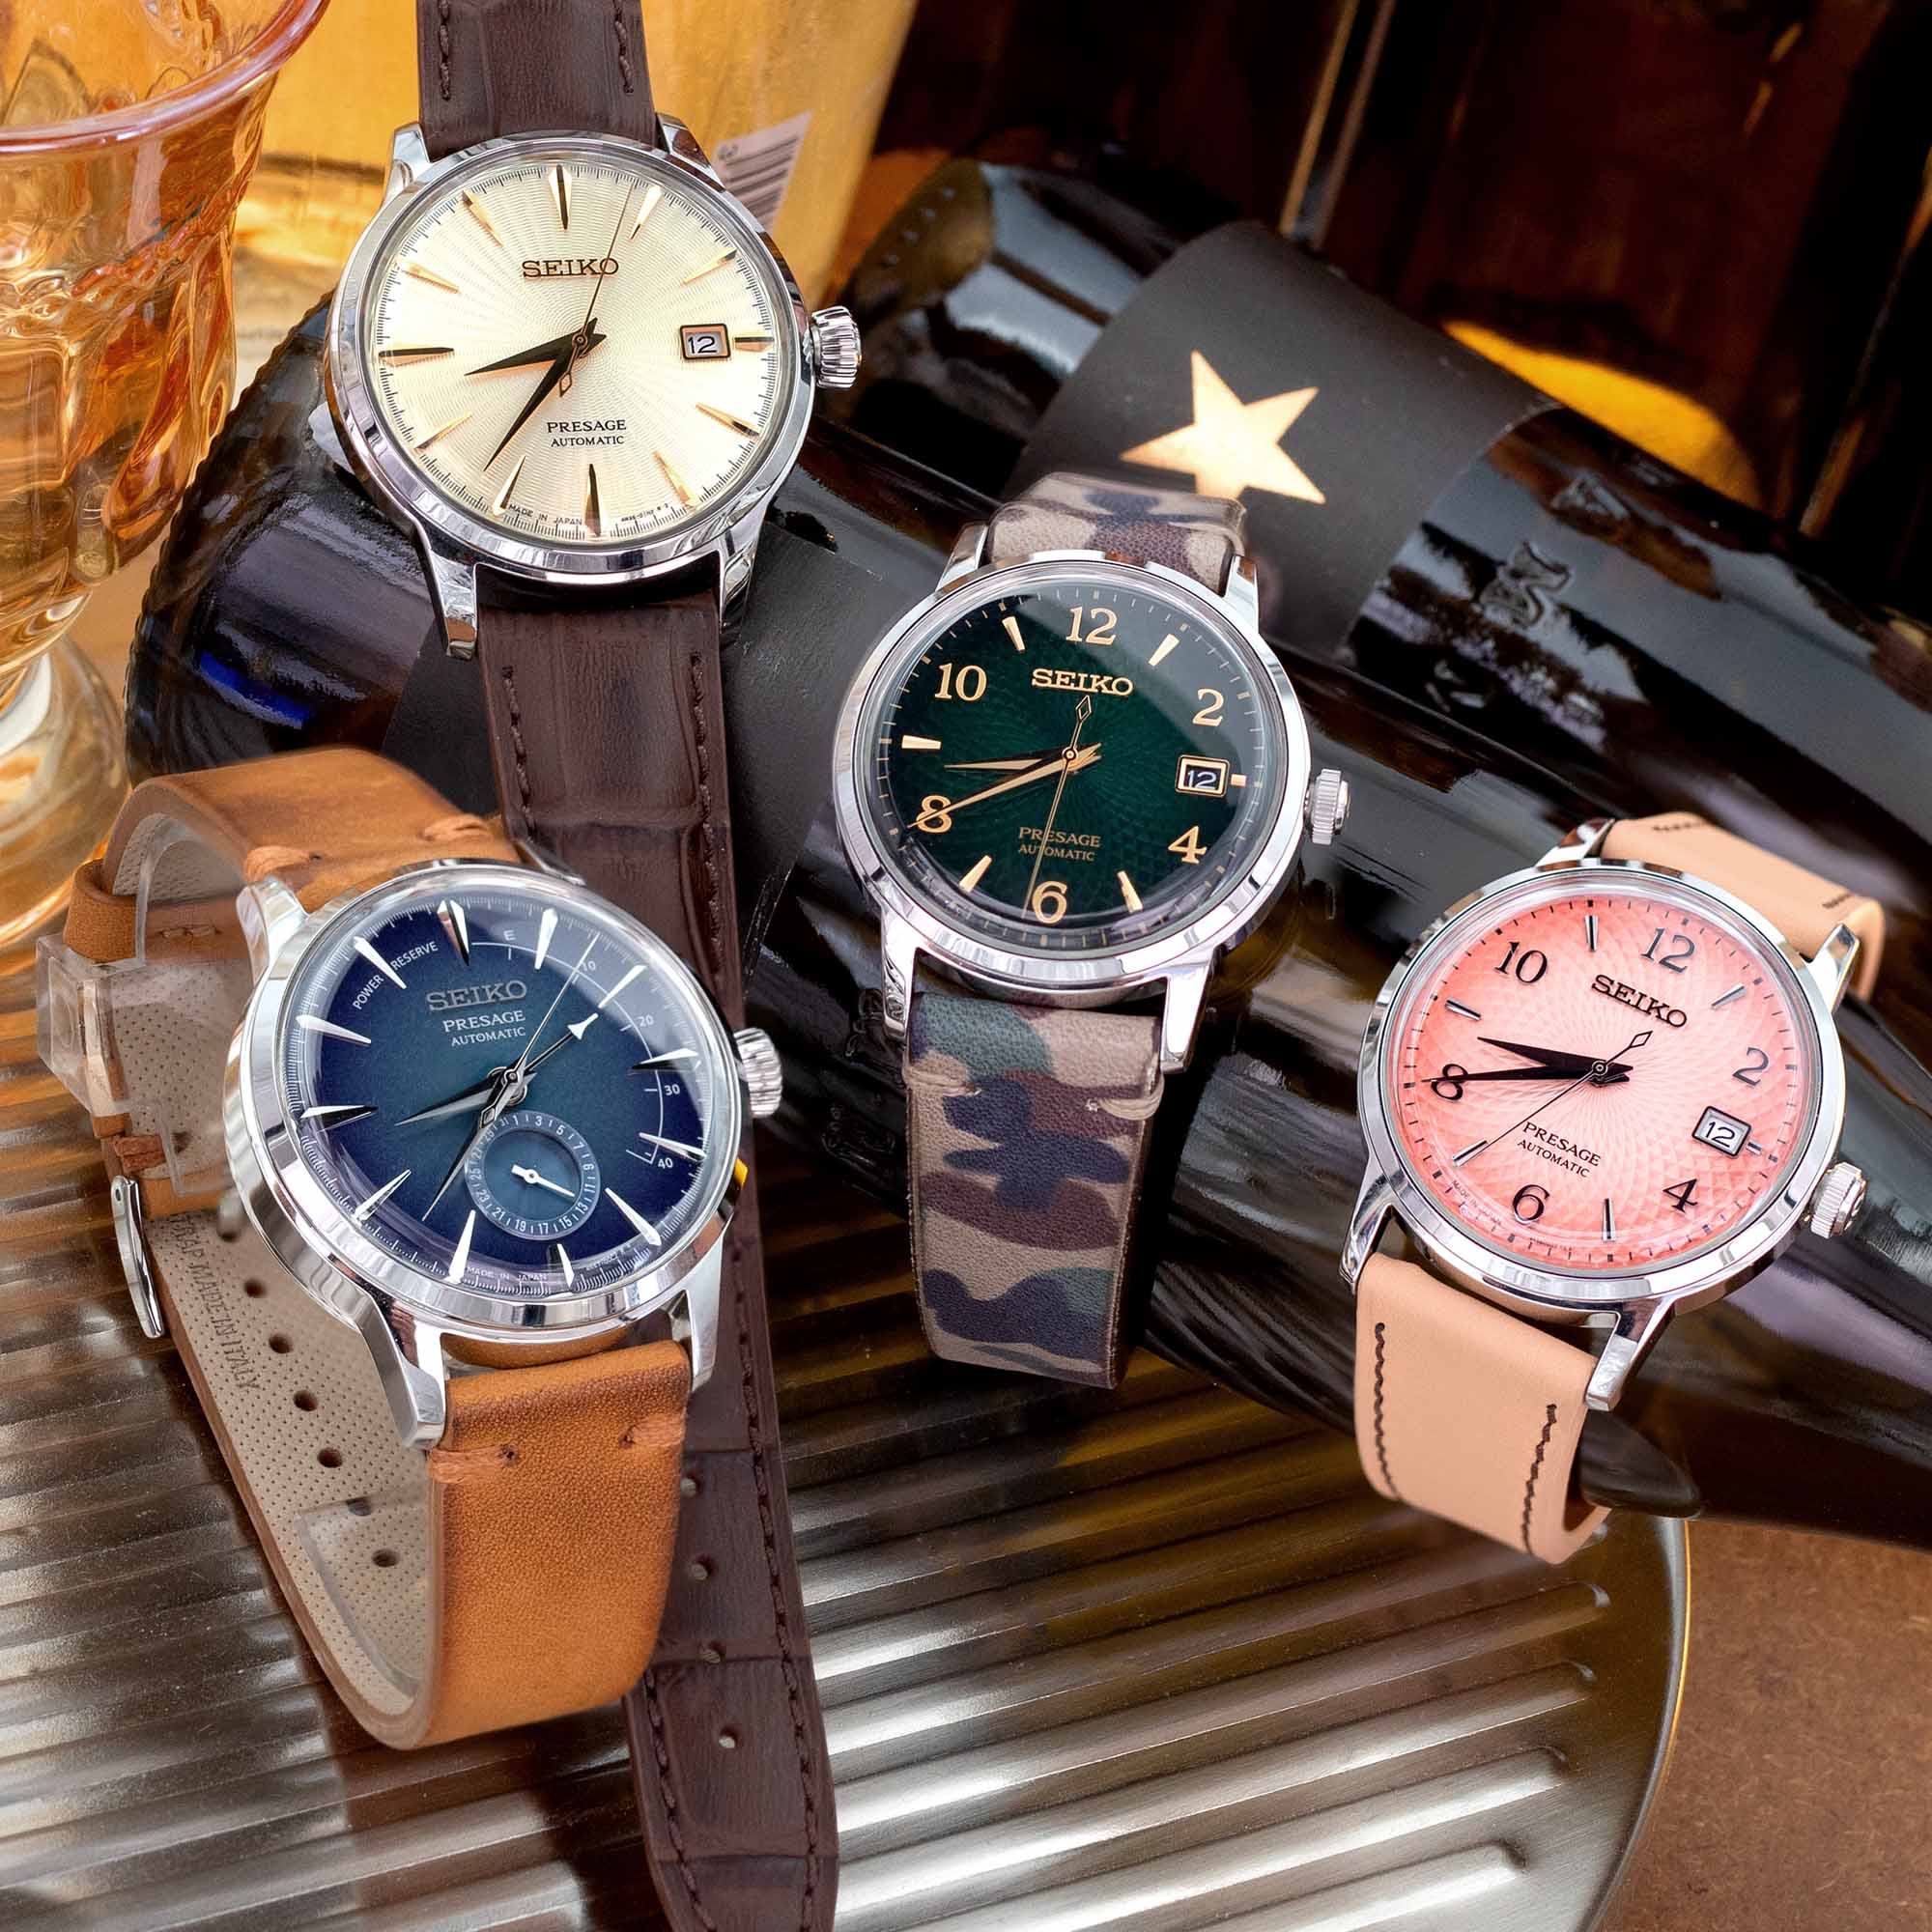 The Seiko Presage Cocktail Time and watch bands from Strapcode